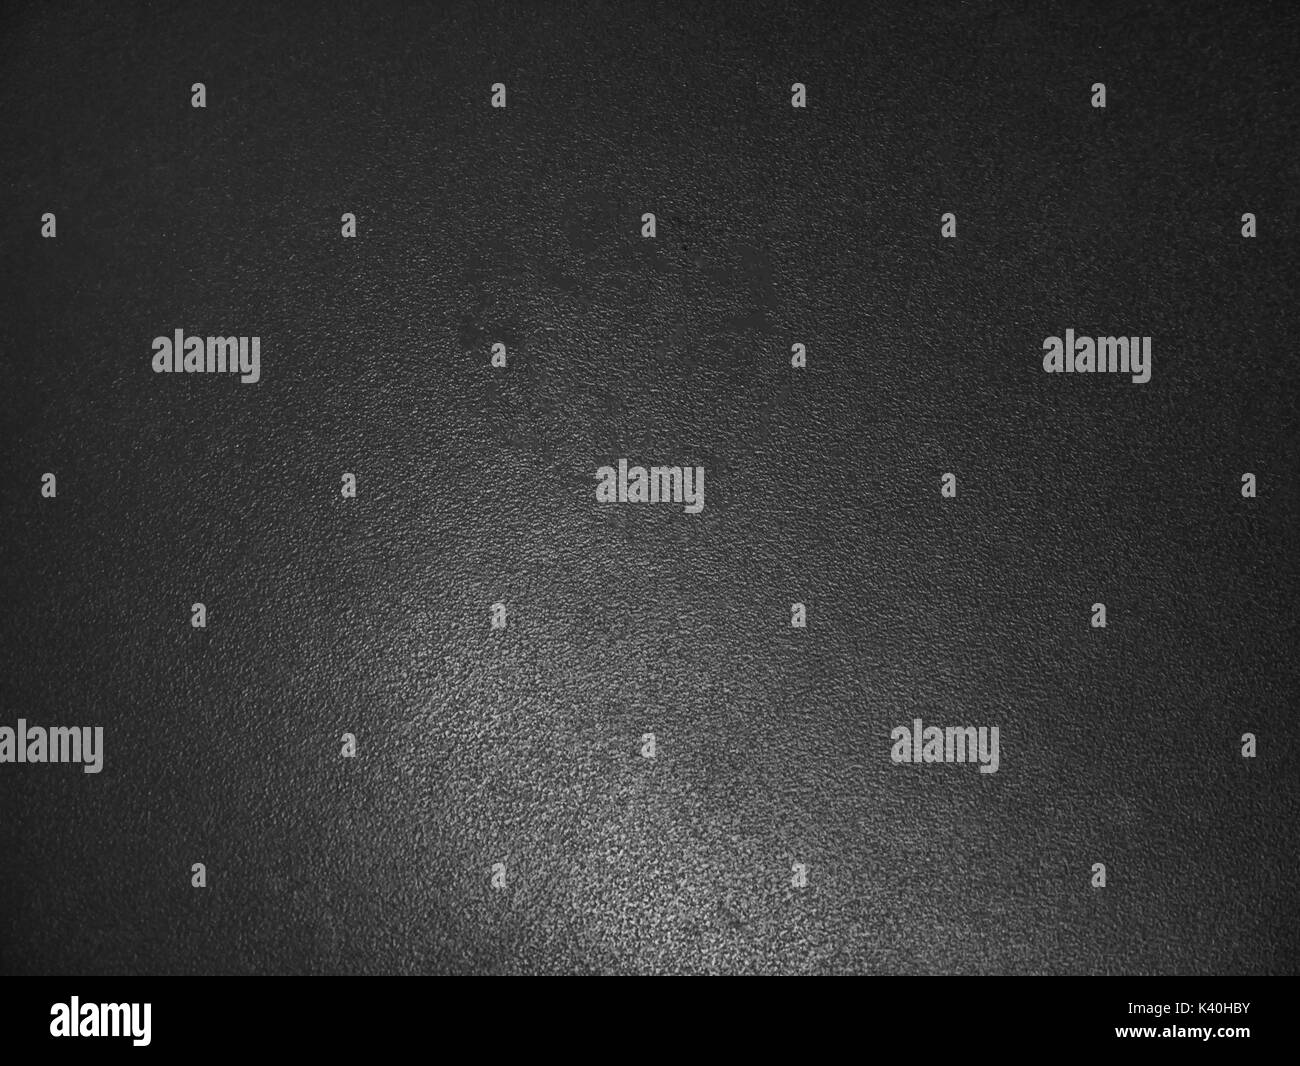 Simple black gray gradient light abstract background for product or text backdrop design Stock Photo